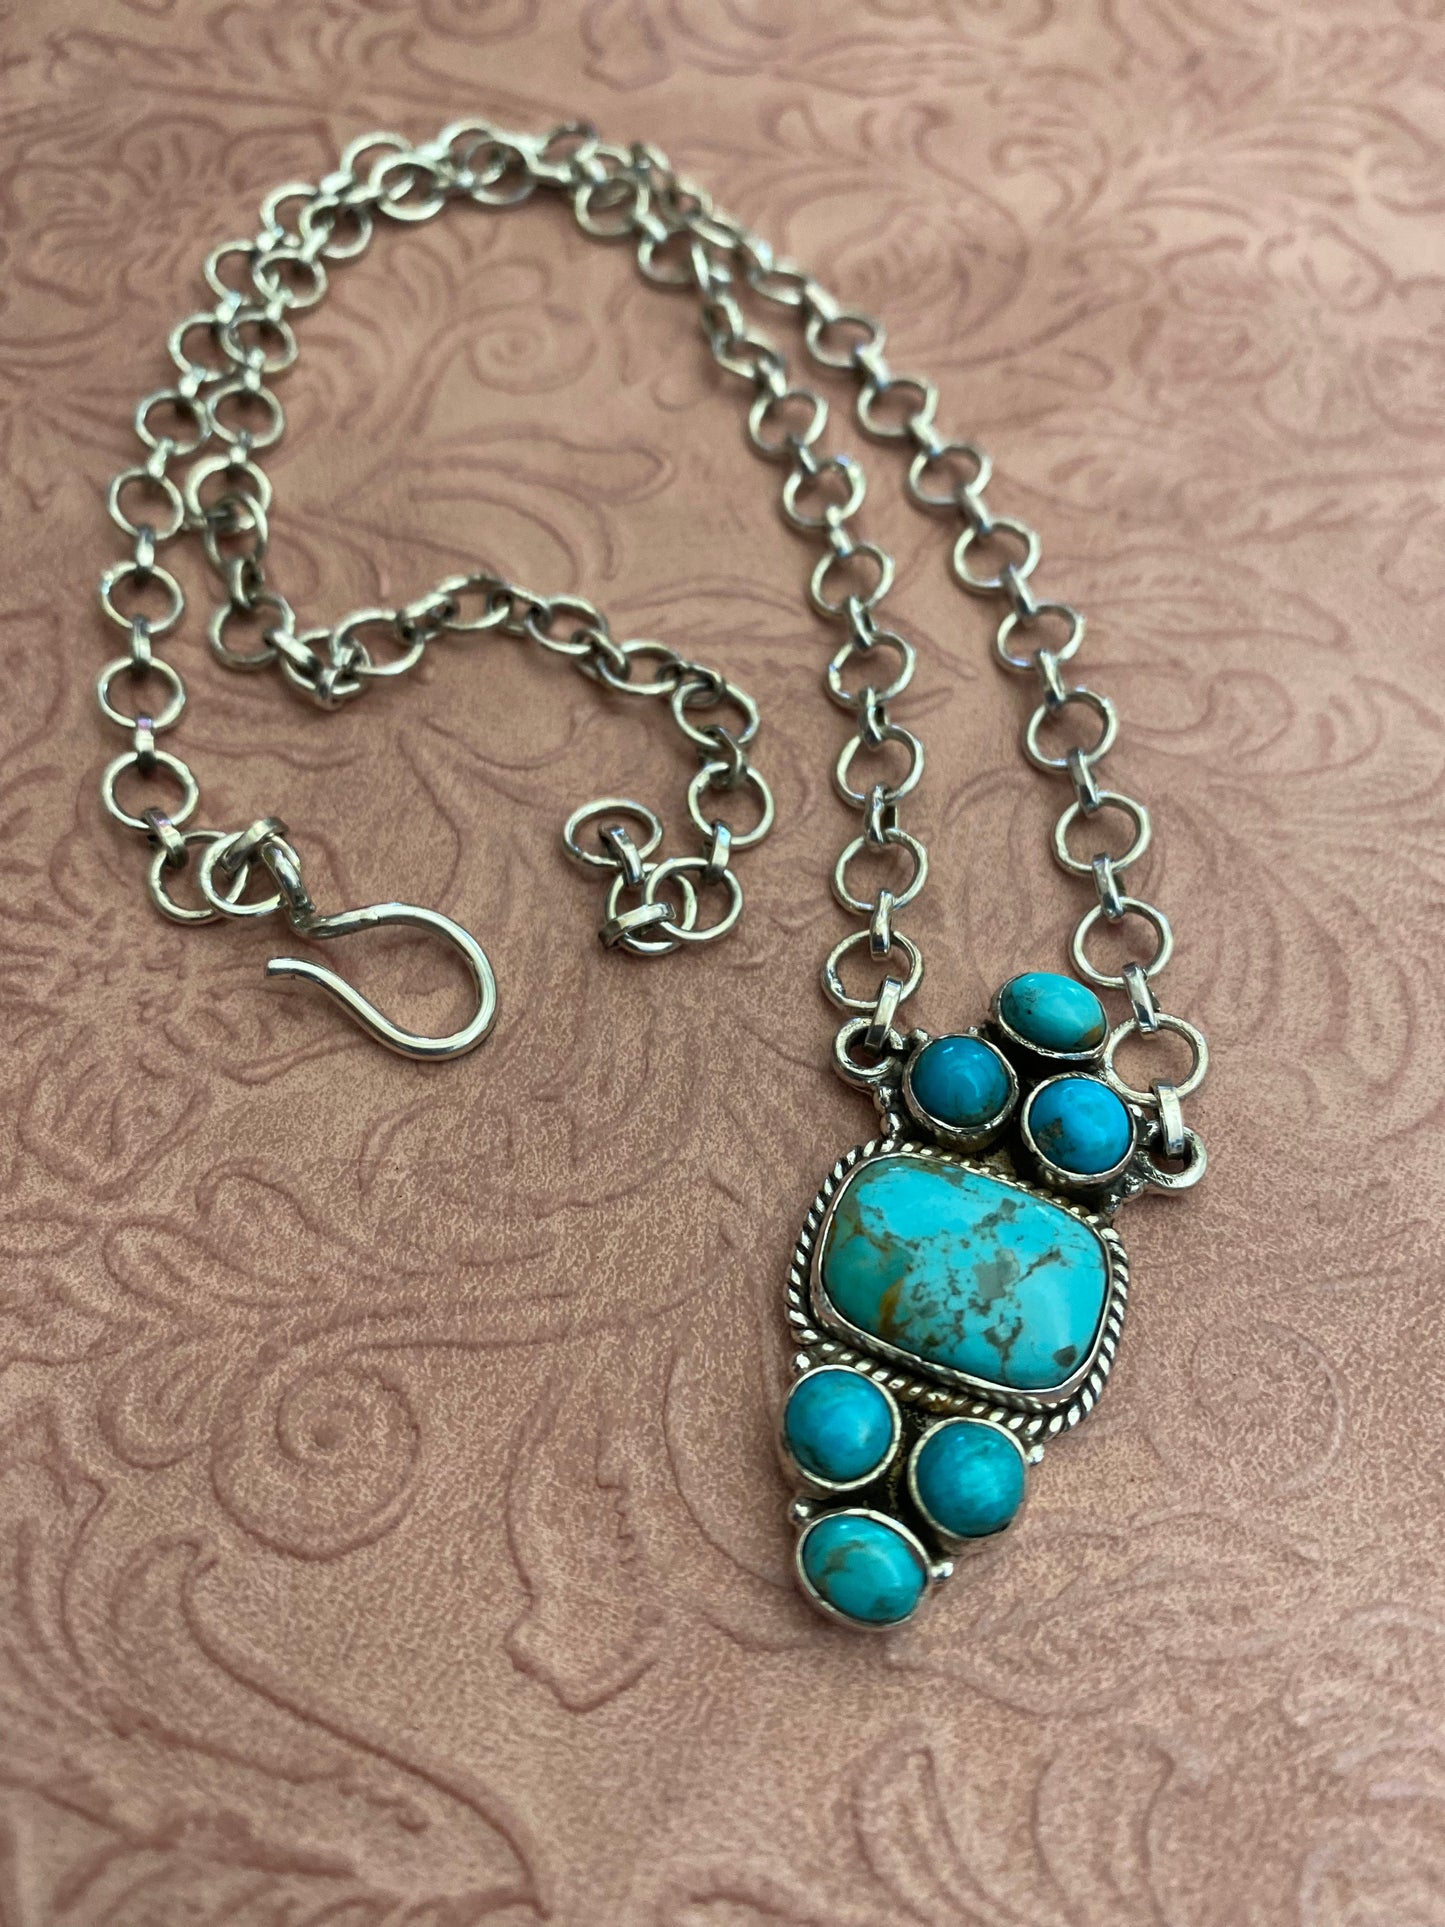 Handmade Sterling Silver and Kingman Turquoise Necklace Signed Nizhoni